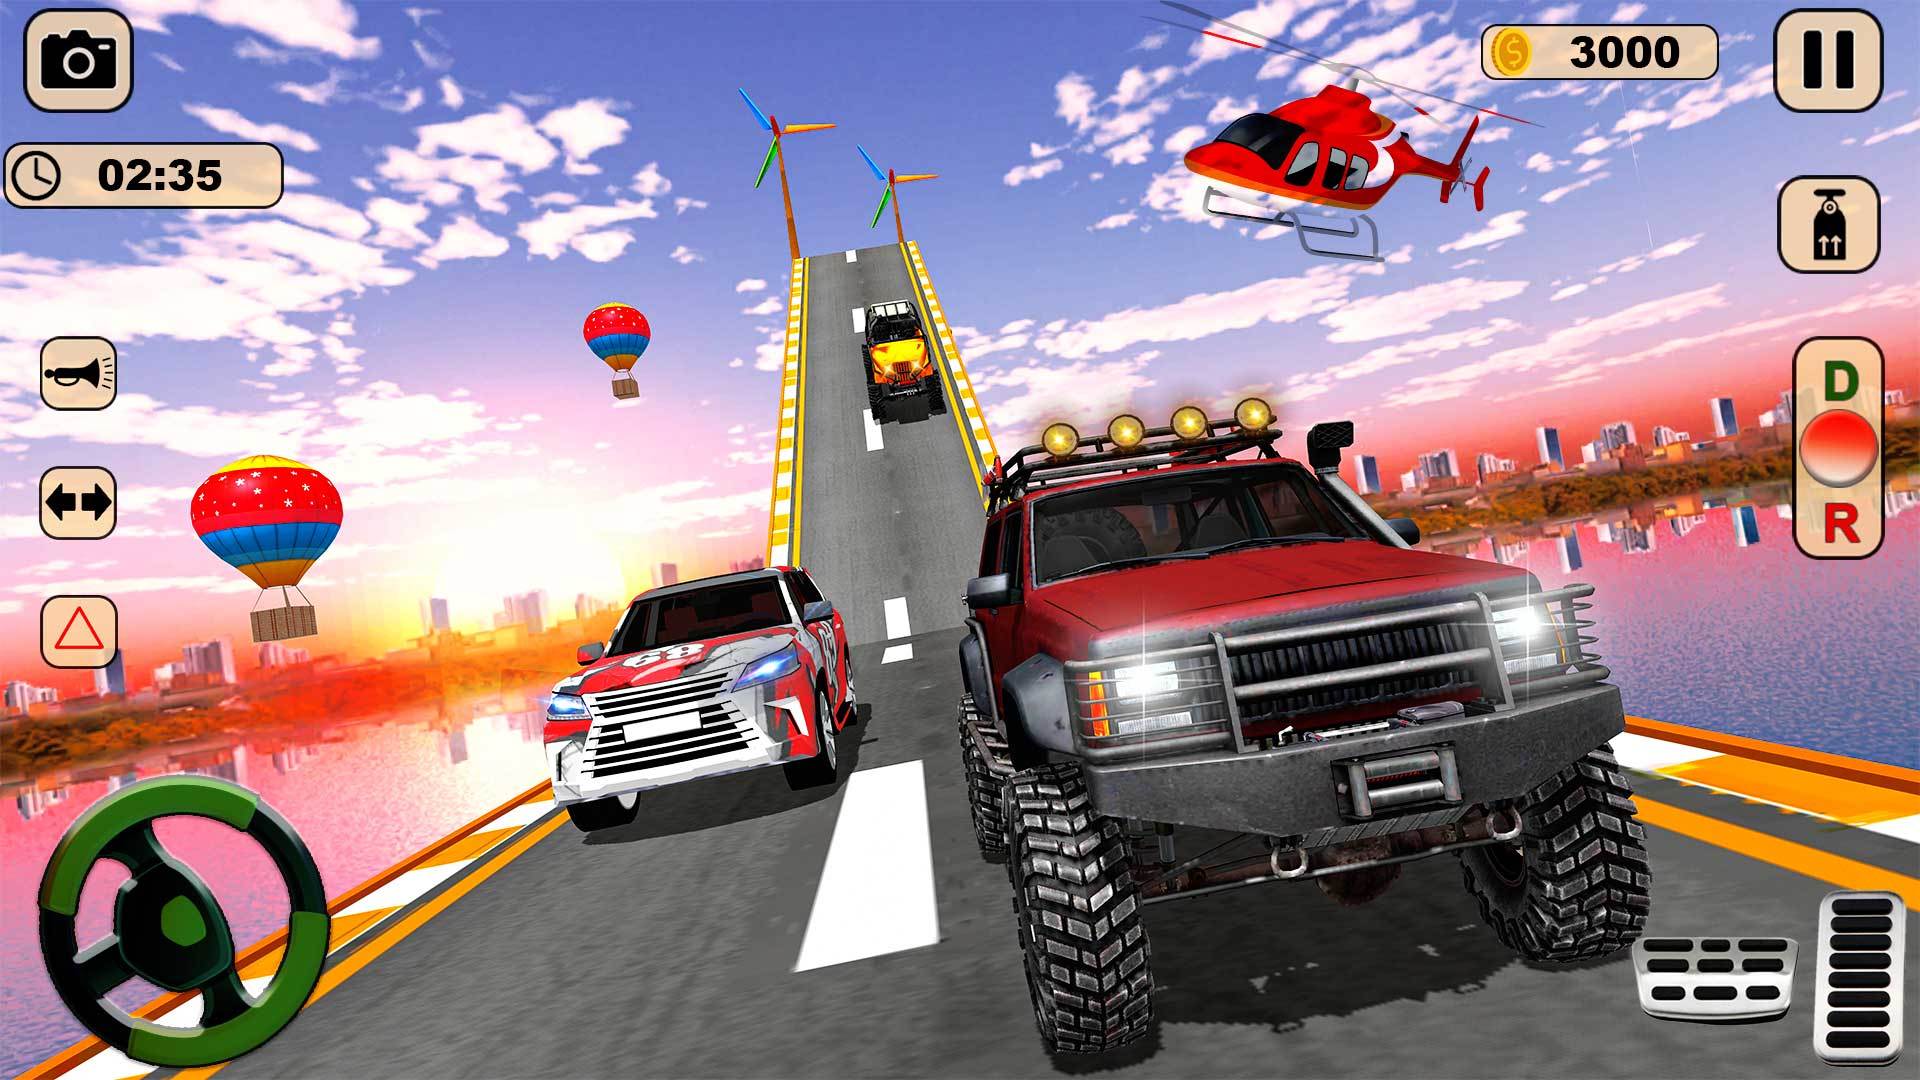 Screenshot 1 of Offroad Jeep 4x4 - Game Mobil 1.1